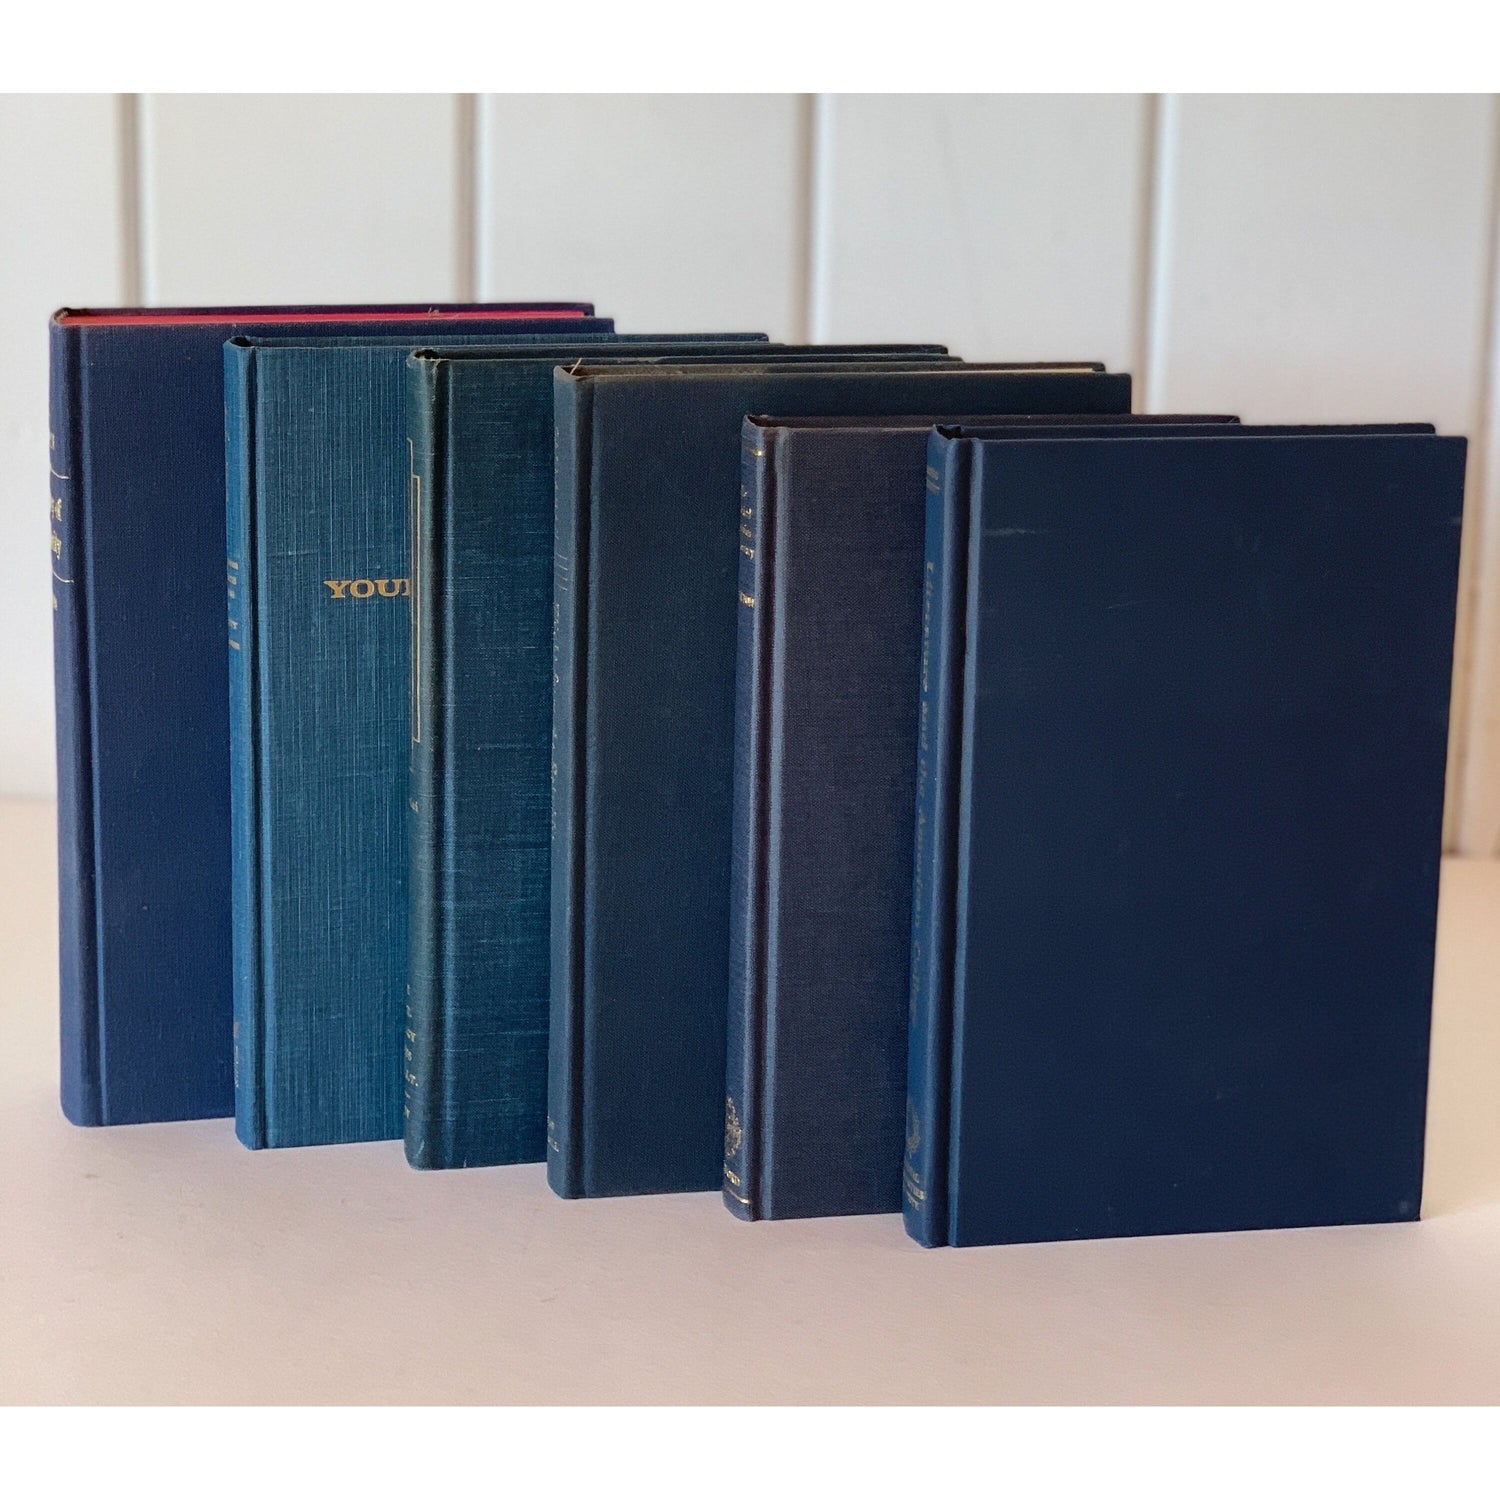 Vintage Navy Blue Books for Shelf Styling, Books By Color, Tall Stately Intellectual Books